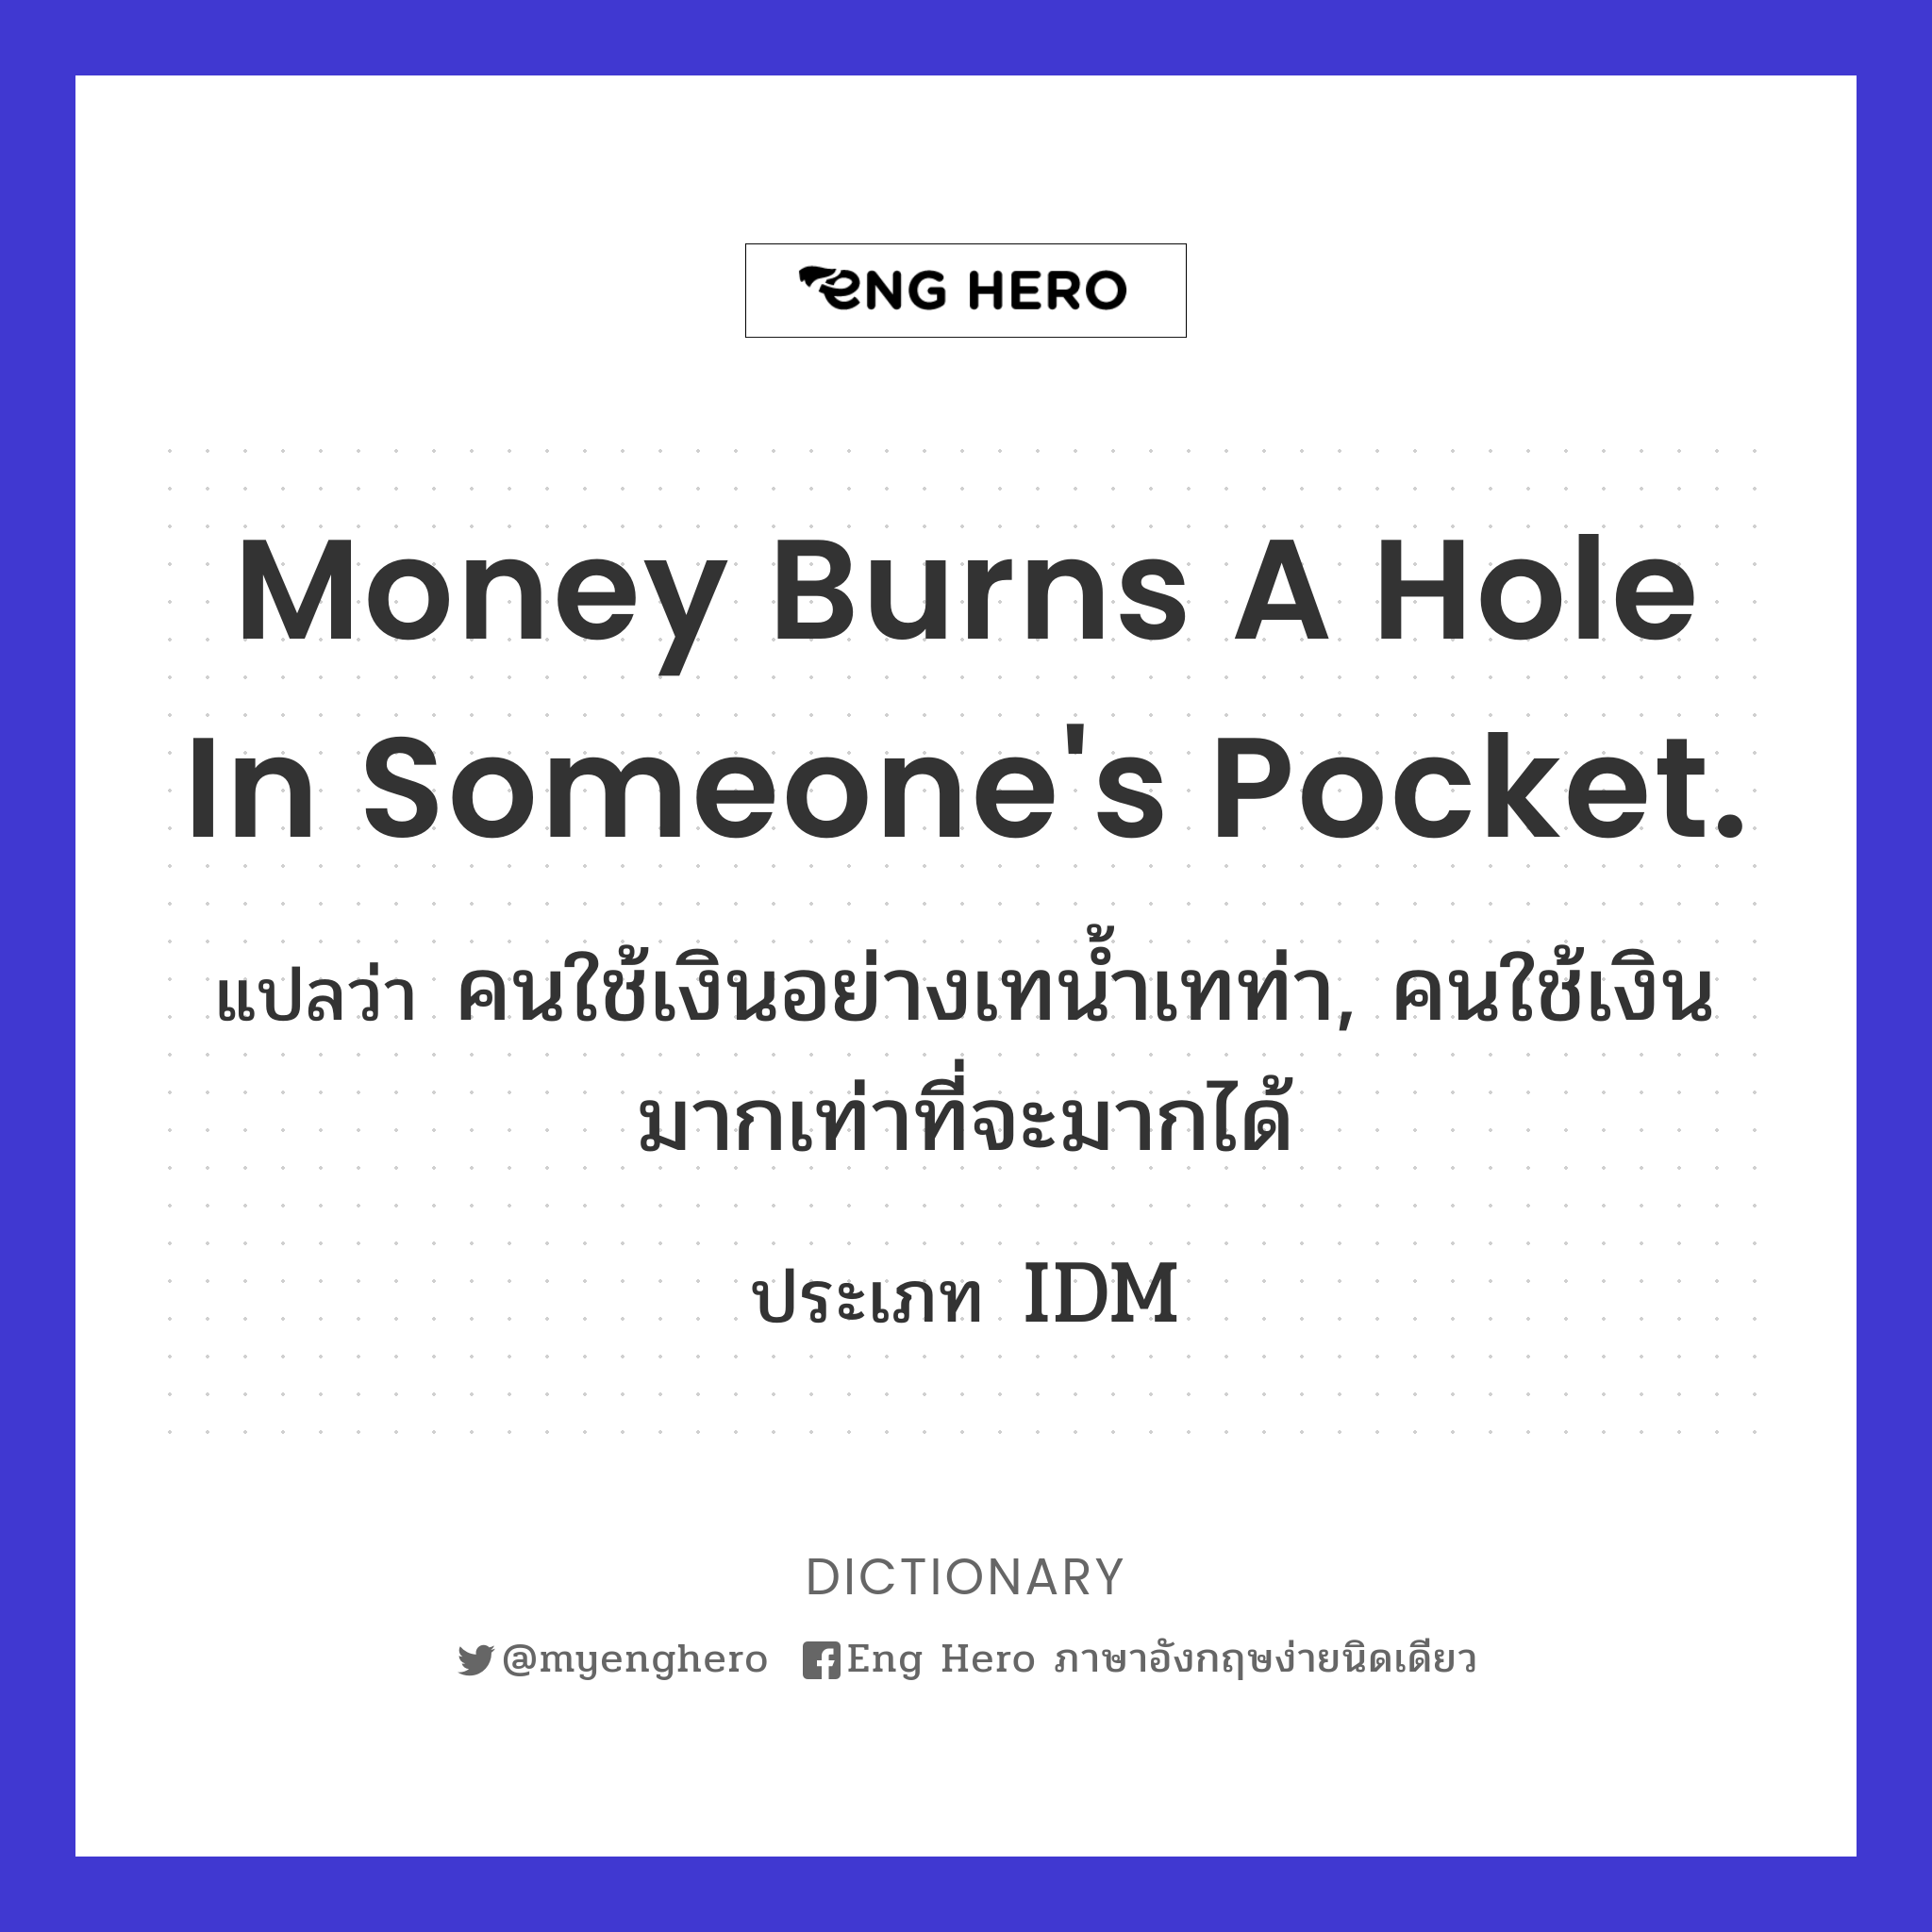 Money burns a hole in someone's pocket.